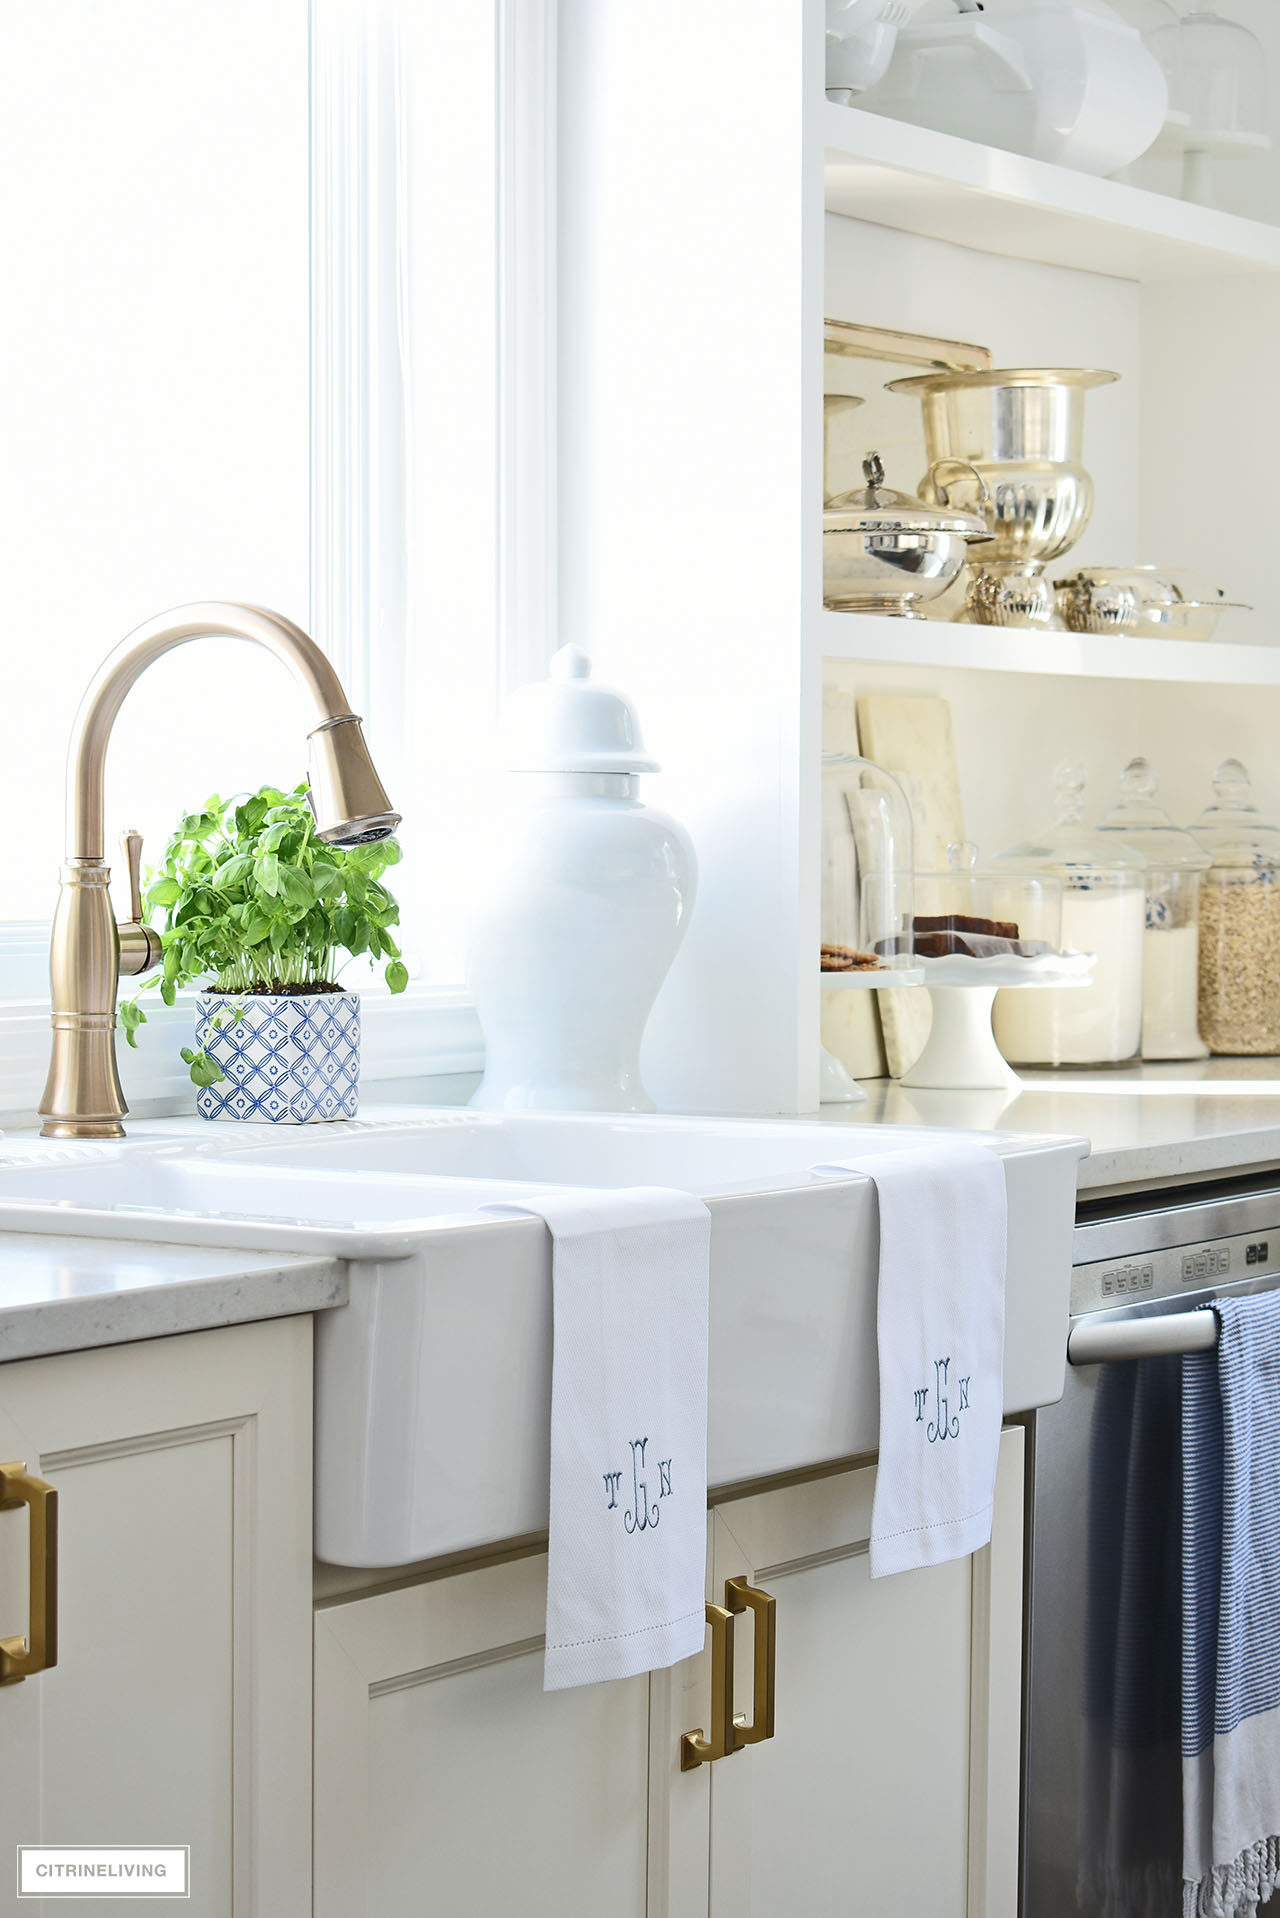 White kitchen farm sink with brass faucet and monogrammed towels.